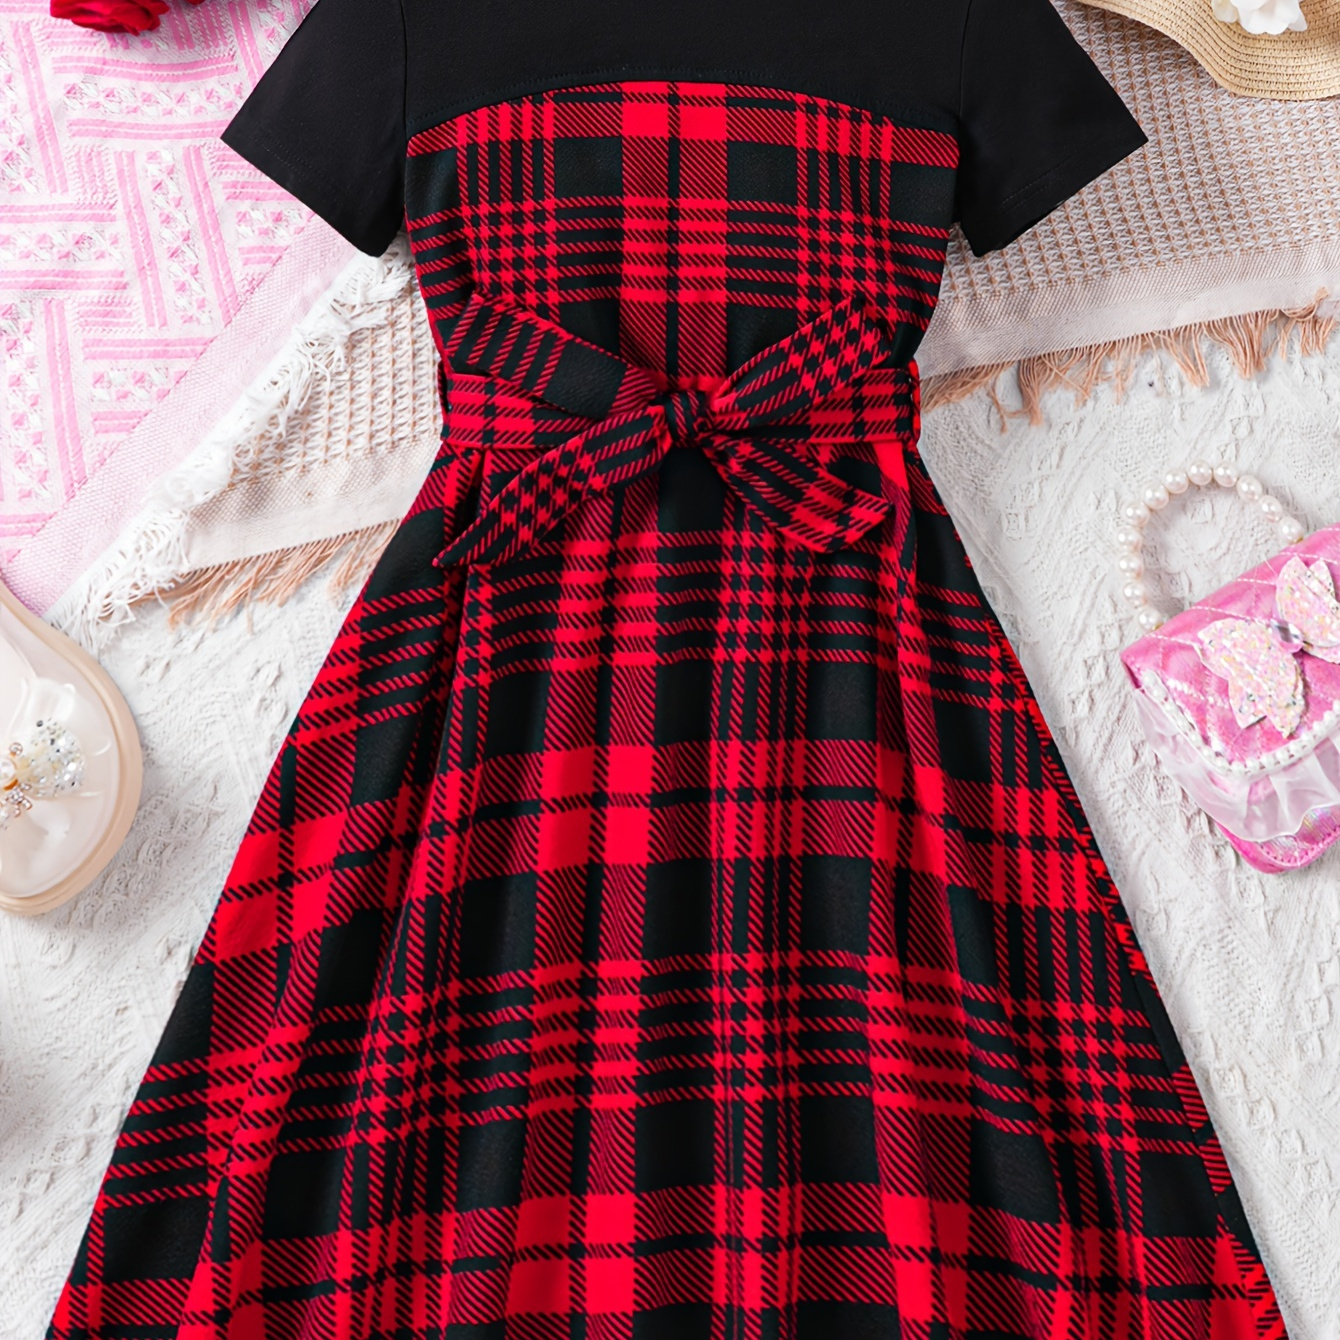 

Girls Checkered Pattern Crew Neck Short Sleeve Dress With Bow Tie For Summer Outdoor Activities